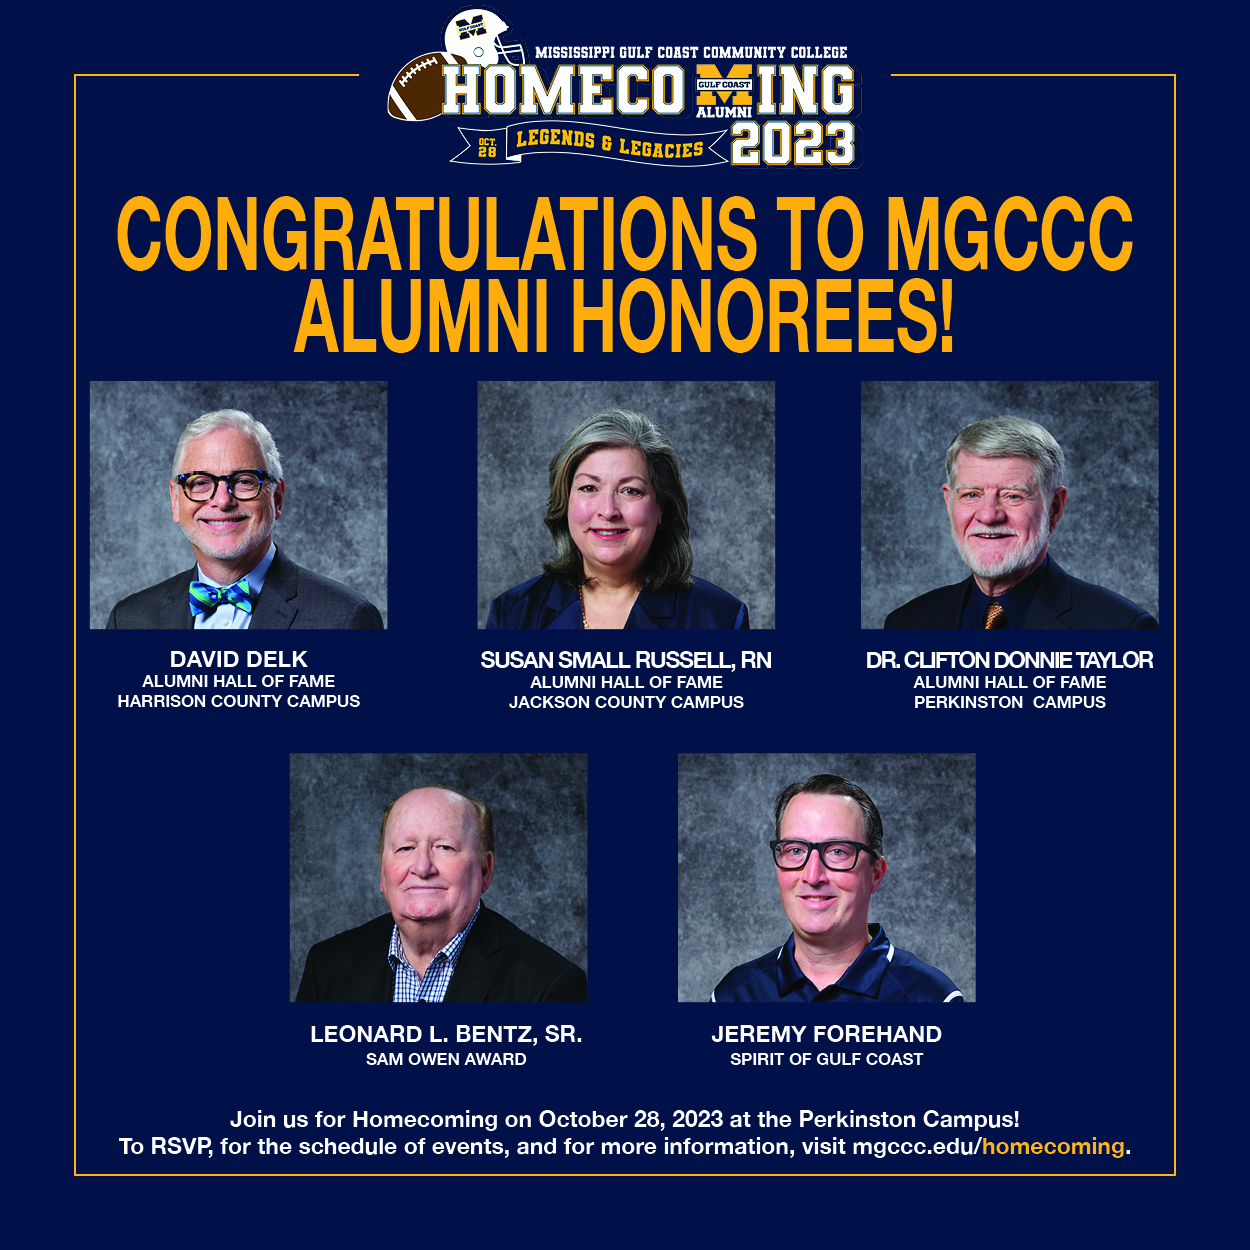 MGCCC recognizes Alumni Hall of Fame, Sam Owen, and Spirit of Gulf Coast Award honorees at Homecoming 2023